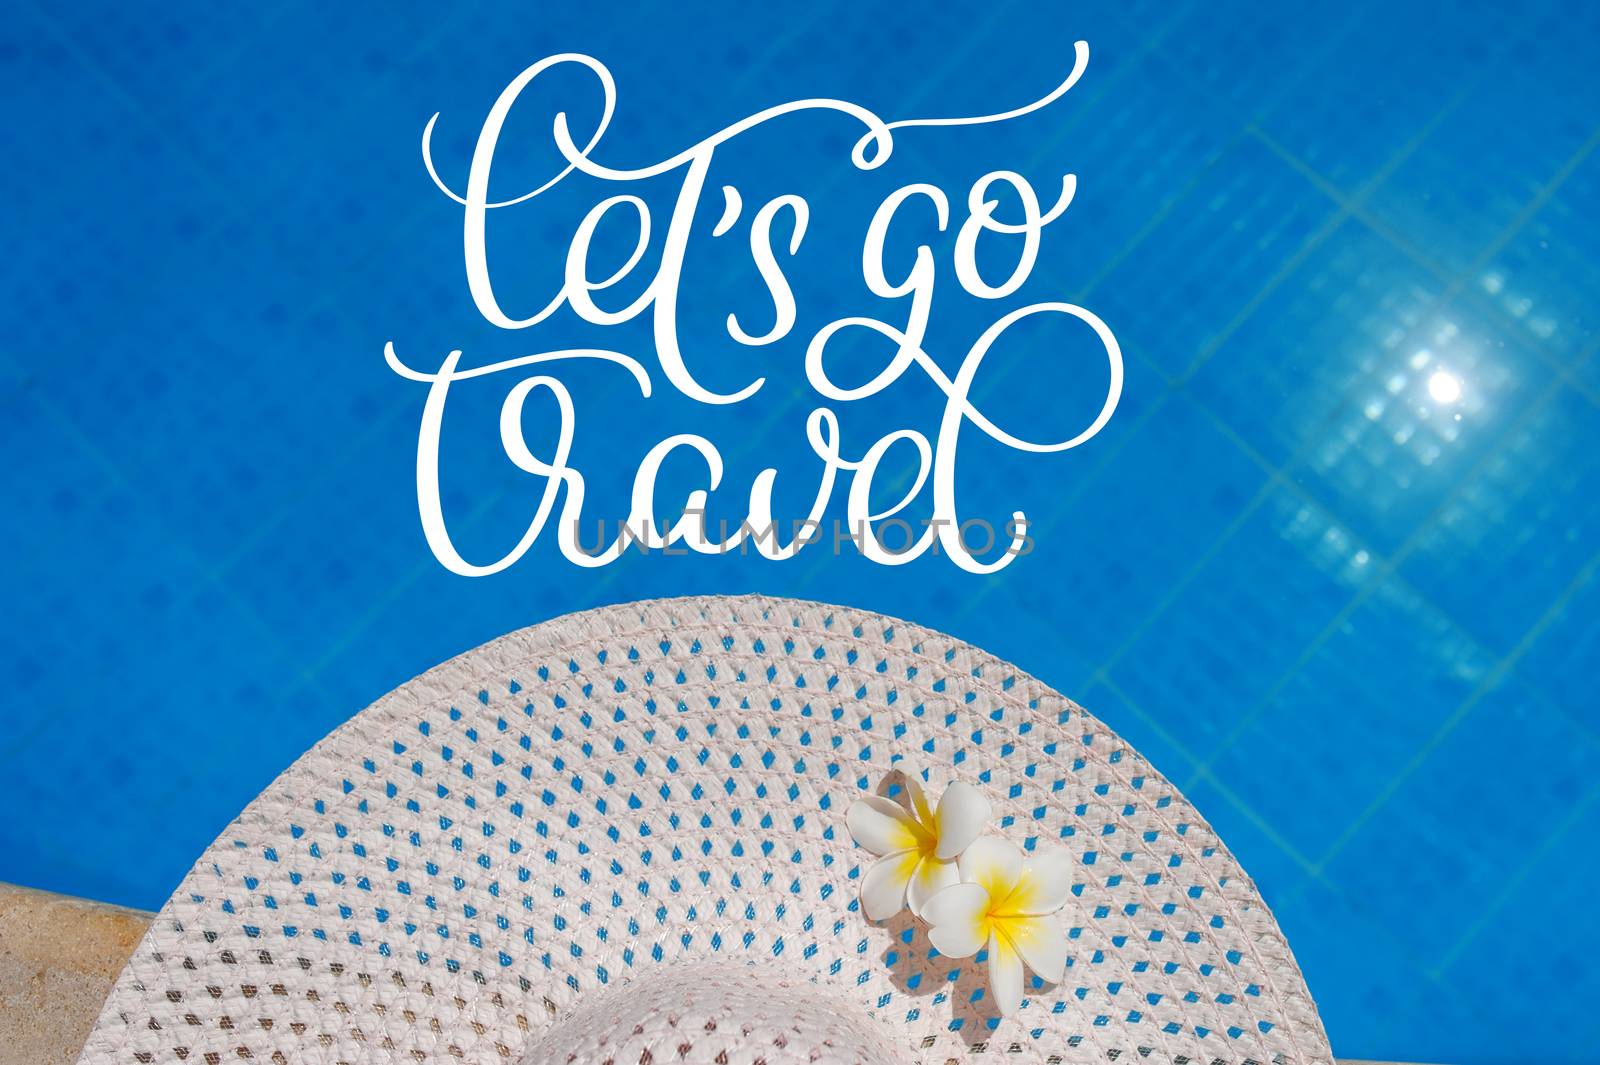 Big white hat on the edge of the pool and text Lets go travel. Calligraphy lettering hand draw.